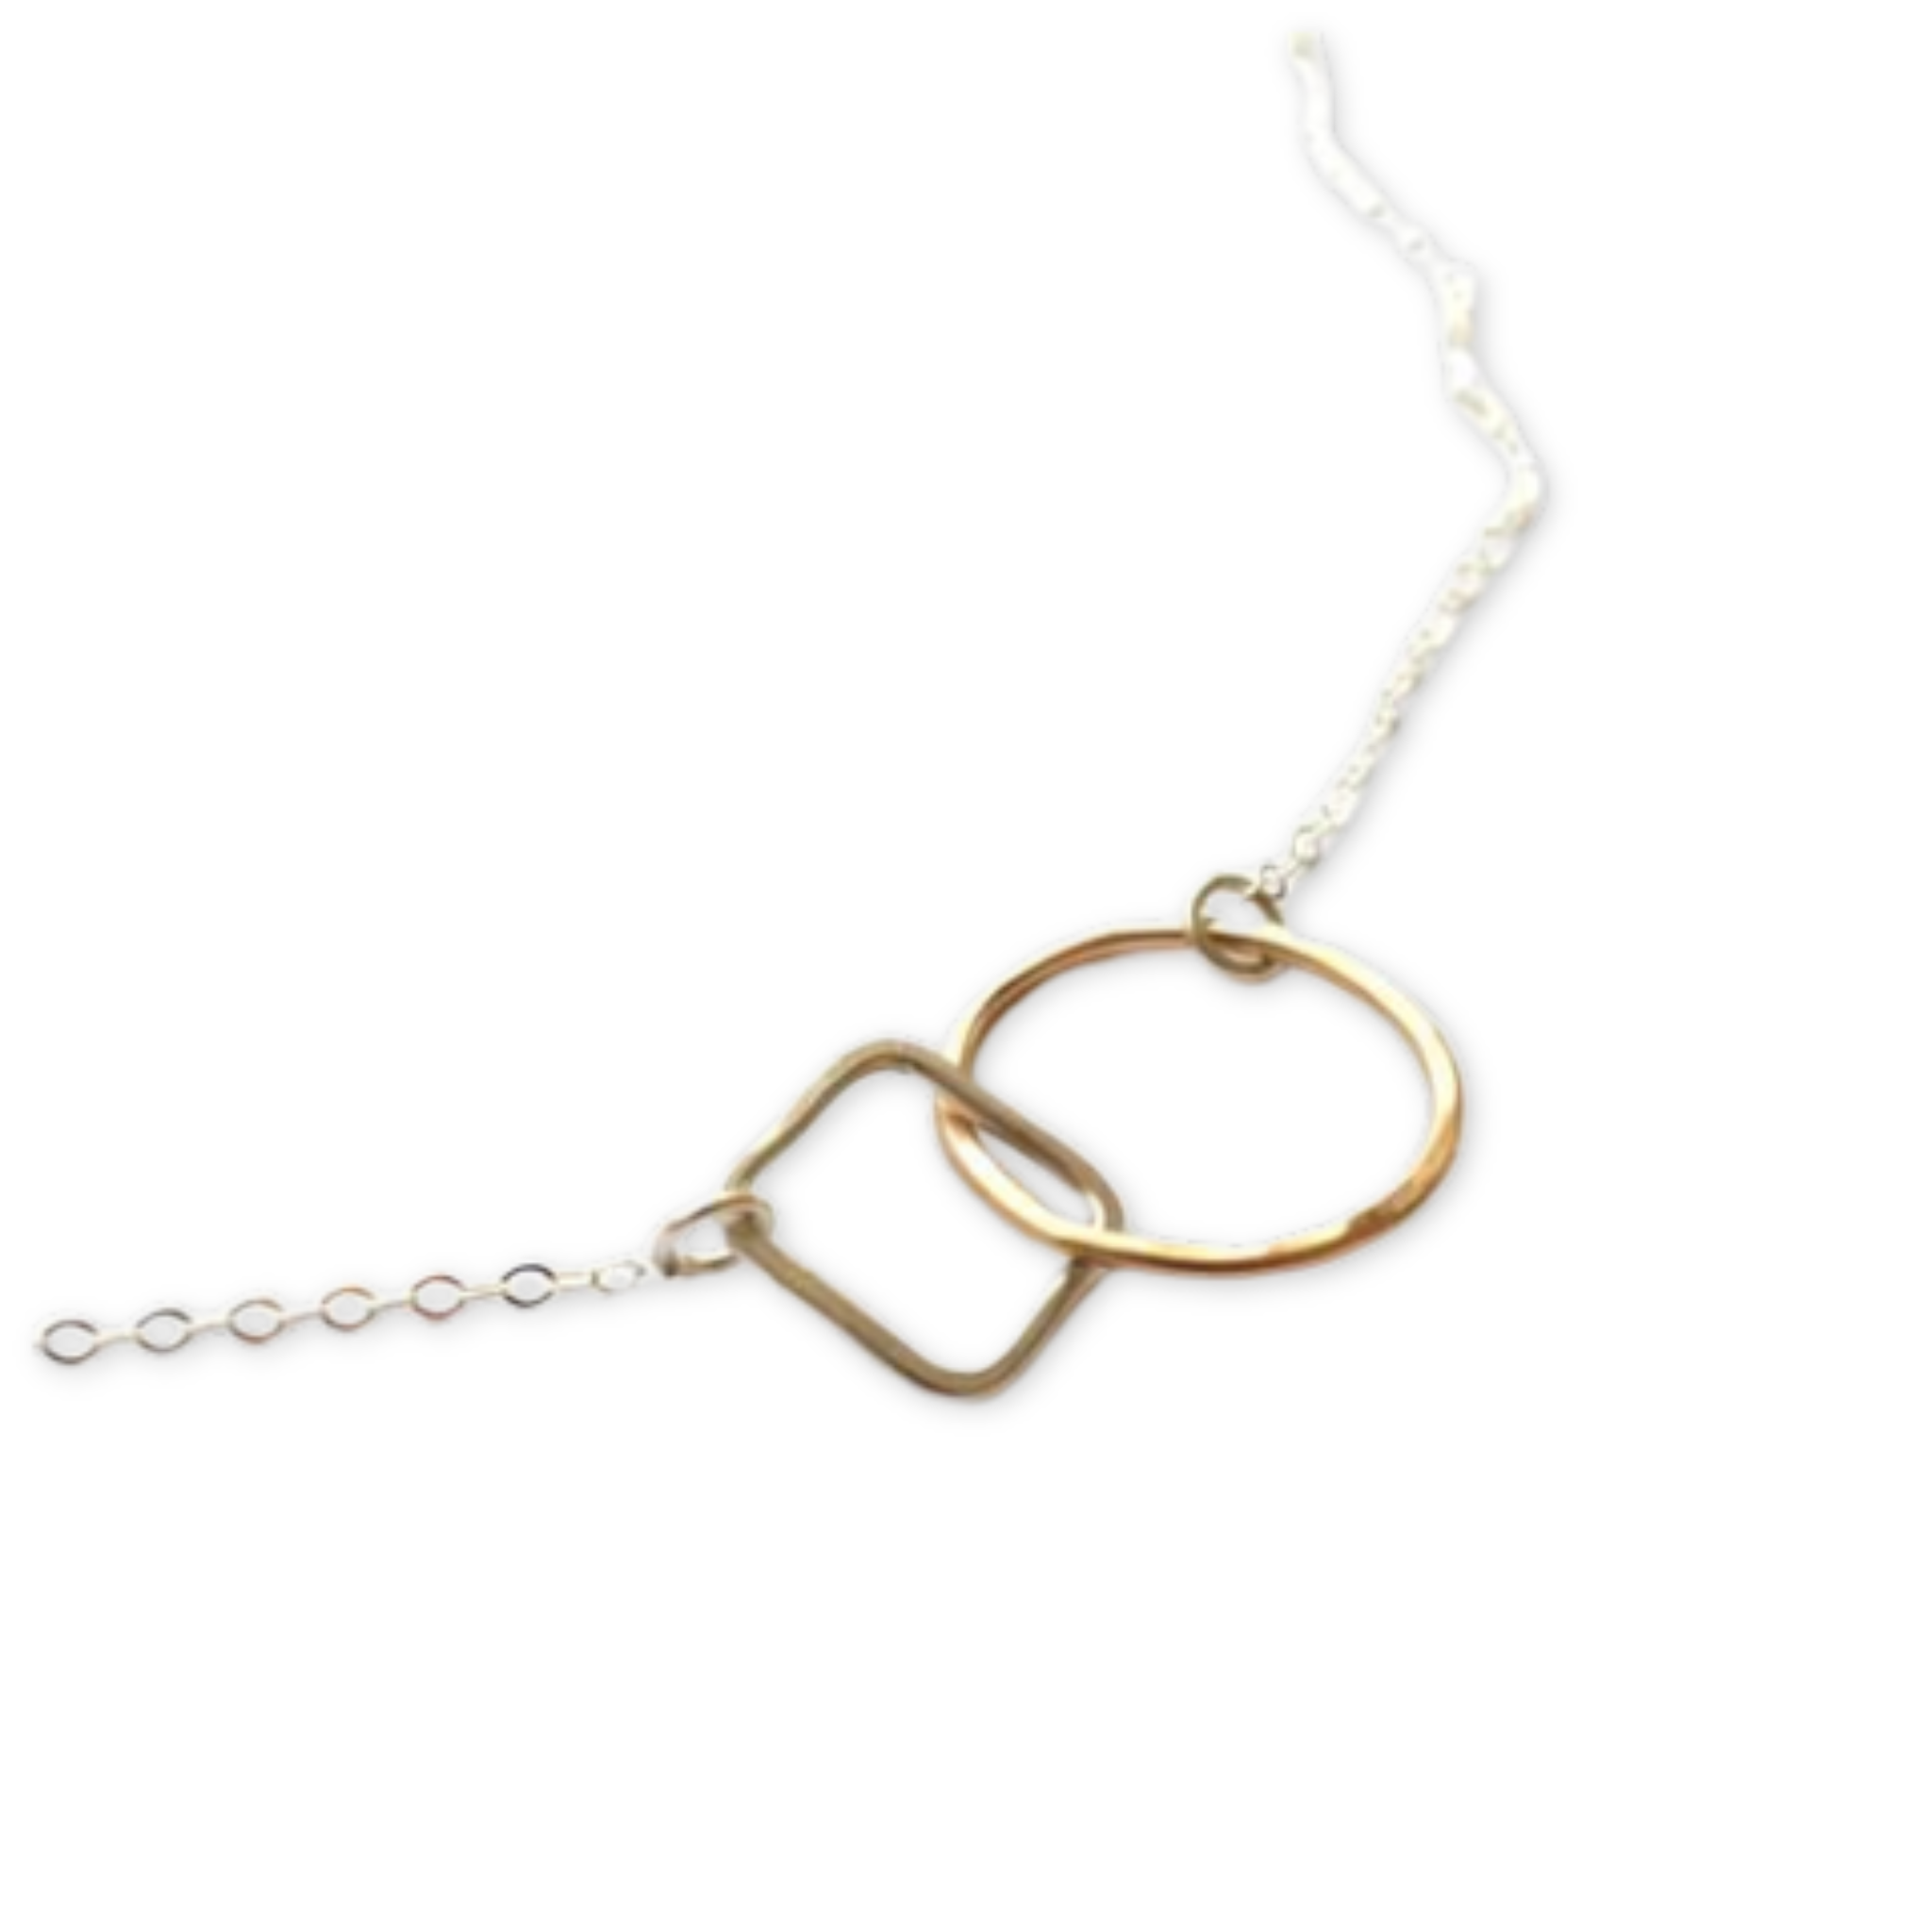 interlocking circle and square on a chain